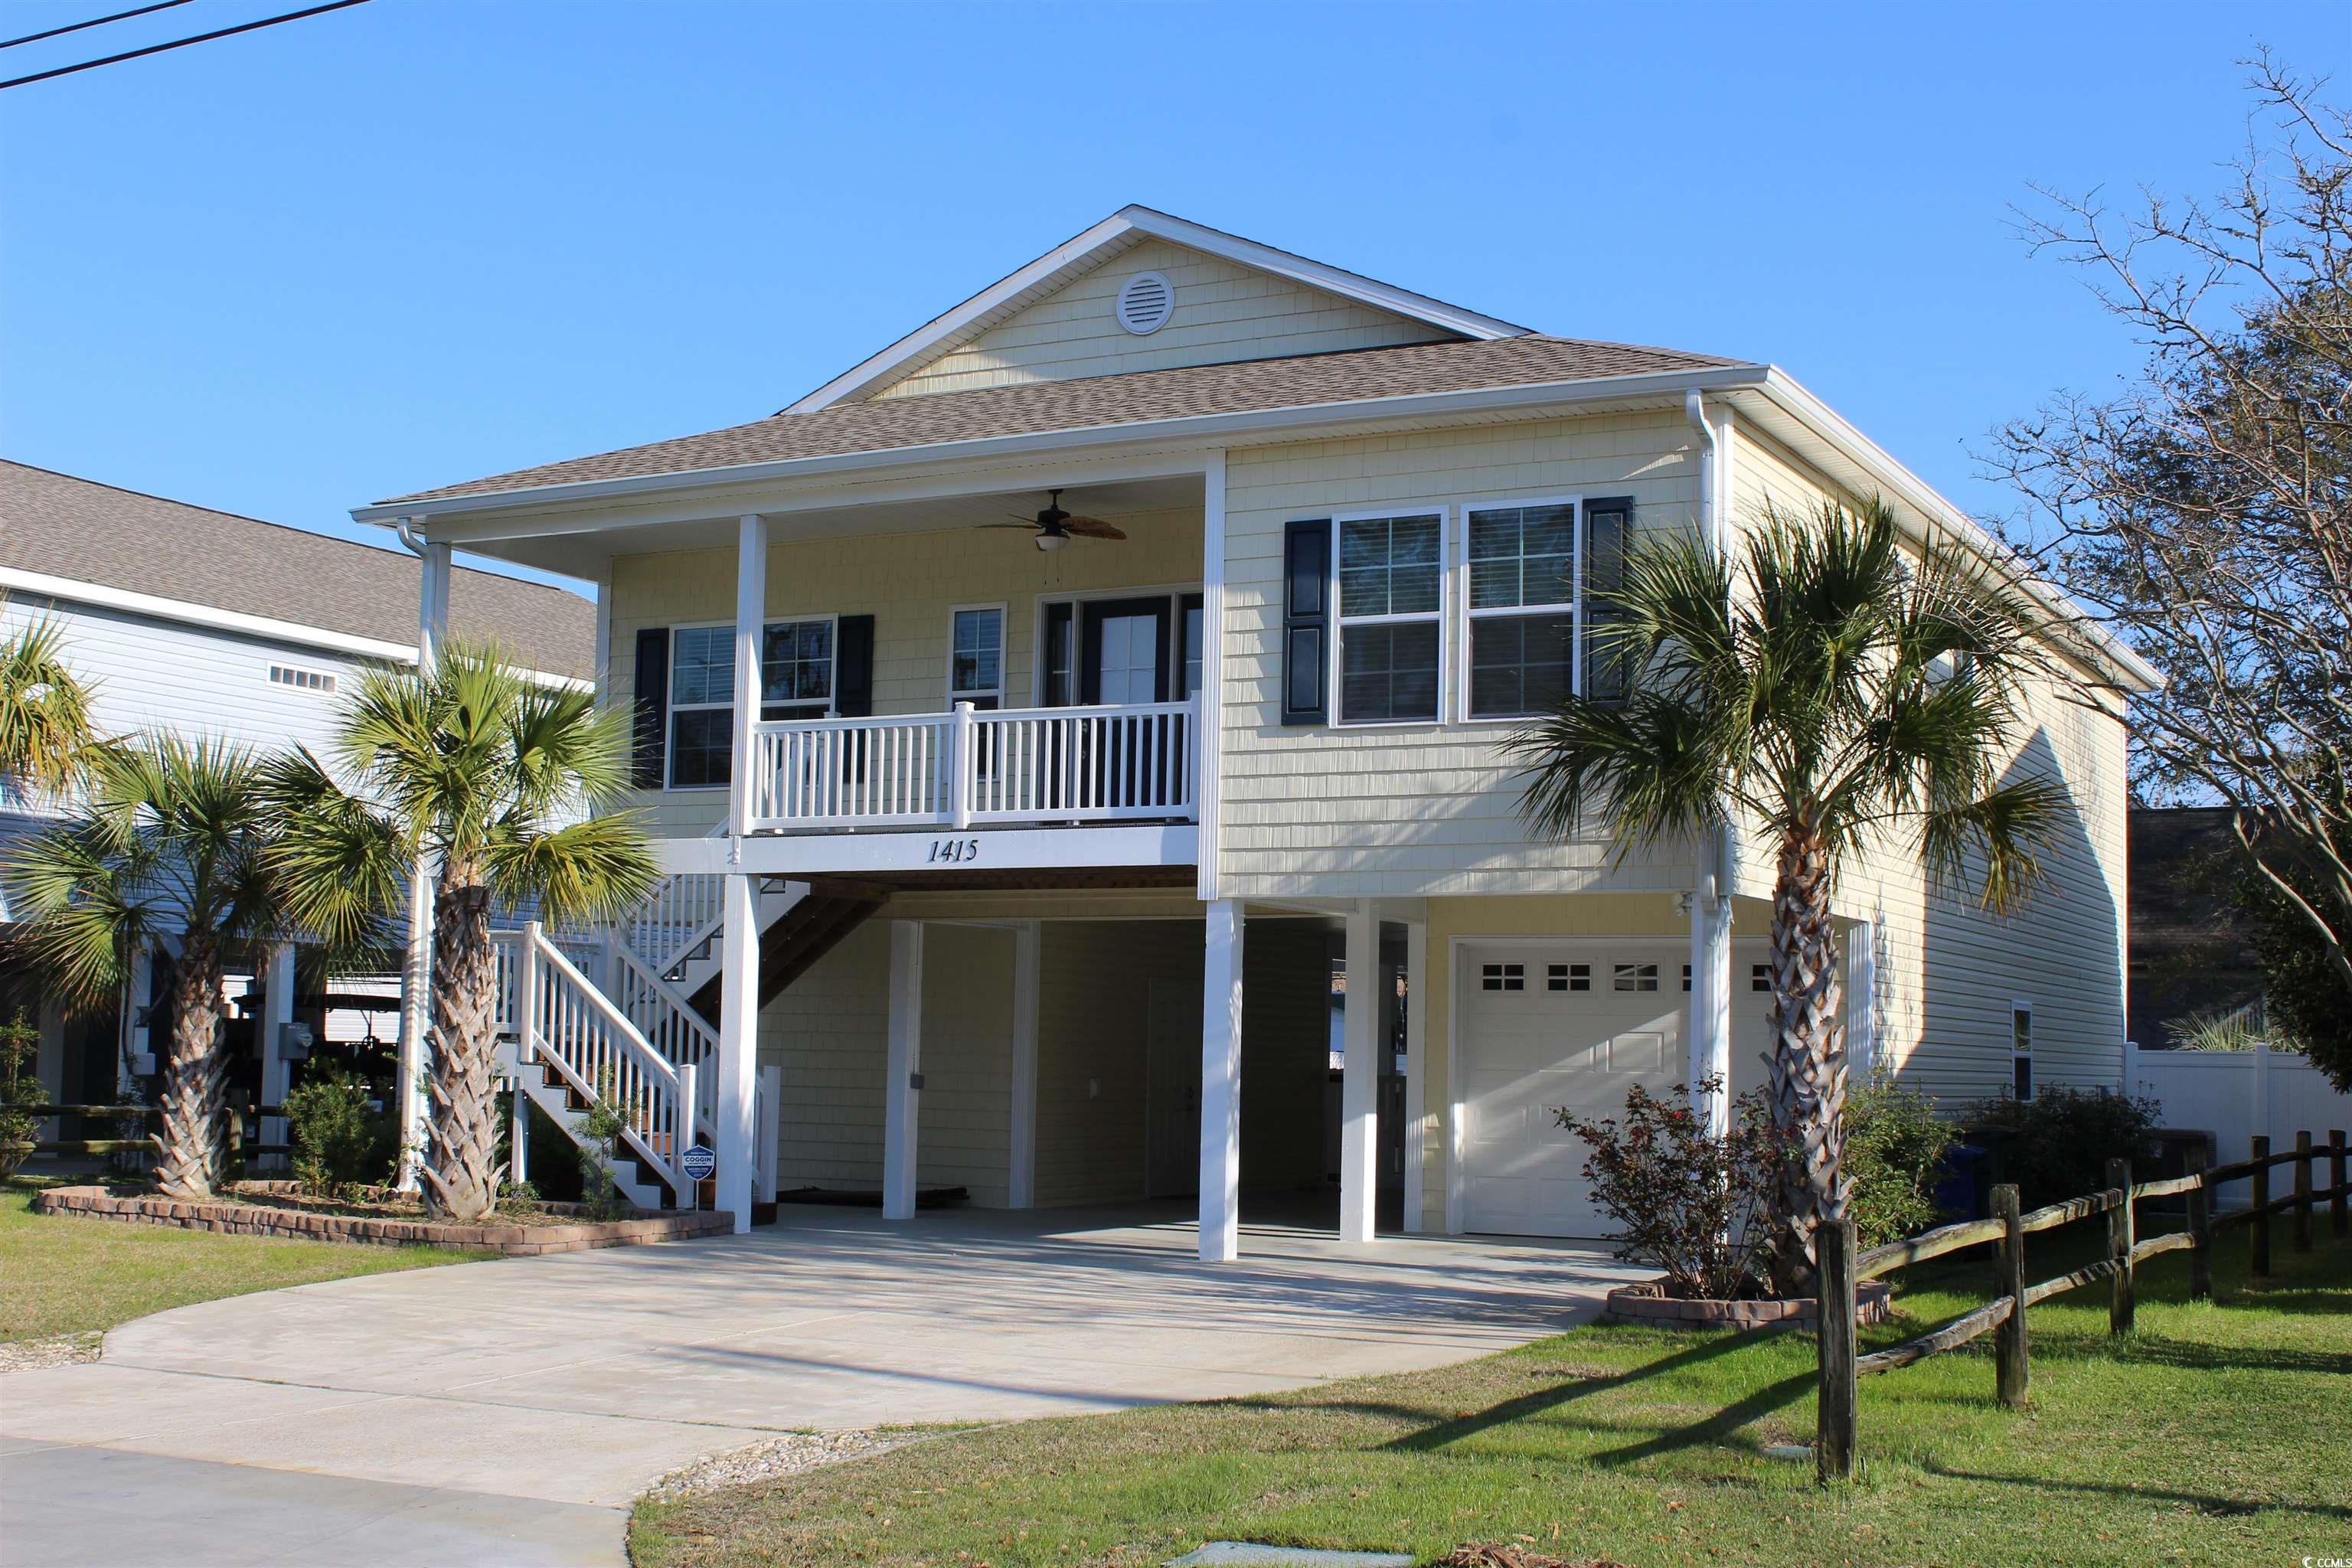 welcome to crescent beach!  located in the heart of north myrtle, this beautiful four bedroom, three bath, home has everything!  just three blocks to the sandy beaches of the atlantic ocean or a quick drive to barefoot landing for dinner.  whether it’s golf, sunbathing, shopping or just lounging around, this location is close proximity to everything the grand strand offers.  the home is a raised beach situated on just over a 1/5 acre lot, property is fully landscaped with a 24’ x 14’ saltwater pool so watch for sharks!  the large backyard comes with a composite storage shed, neatly tucked in the back corner of the fully fenced in back yard.   swimming pool is heated and cooled for the most comfortable experience possible.  a 50amp service has been installed for a hot tub/spa addition in the covered patio area.  entering the home, you notice the high 10-foot ceilings with an open floor plan allowing for a bright and airy environment.  moving through the nearly 500 sq ft living space you will find the nicely placed kitchen with ample space for the whole family, if necessary, but with a modern design that gives convenience to a solo chef as well.   this very well thought out kitchen is finished off with all stainless-steel whirlpool appliances and beautiful granite countertops.  a huge pantry was built with the option to be converted to an elevator if desired.  the very ample laundry room area is located adjacent the pantry, in the corner of the kitchen.  moving on to the master suite we find a private bathroom complete with double sinks with an oversized step in tile shower!  the vip suite has direct access to a full bath as well.  the two other guest rooms share private access to a “jack-and-jill” style bath with a double vanity and shower.  the home has a 2-car garage plus several more covered spaces thanks to the raised beach design.  featuring a long driveway and large lot size, this property gives the capability to park more vehicles, golf carts, rv’s, boats and with no hoa…no problem!  there is an additional bonus room on the ground level across from the garage.   the bonus room measures 11’ x 21’ and with a mini-split hvac unit already installed, this space could easily be made into a fifth bedroom with little additions.  upon entering the backyard, you’ll find an outside oasis complete with a saltwater pool, outdoor shower, storage building with more than enough space for entertaining guests.  a four-zone irrigation system with sprinklers keeps everything tropical and green with little effort.  whether you are looking to retire, have a vacation home or both!  look no further, you’ve found the best location on the grand strand!  crescent beach is a small community within a small community.  being part of the north myrtle beach township gives access to all the amenities of the broader area while keeping the small “beach town” feel.  call today and schedule a showing!